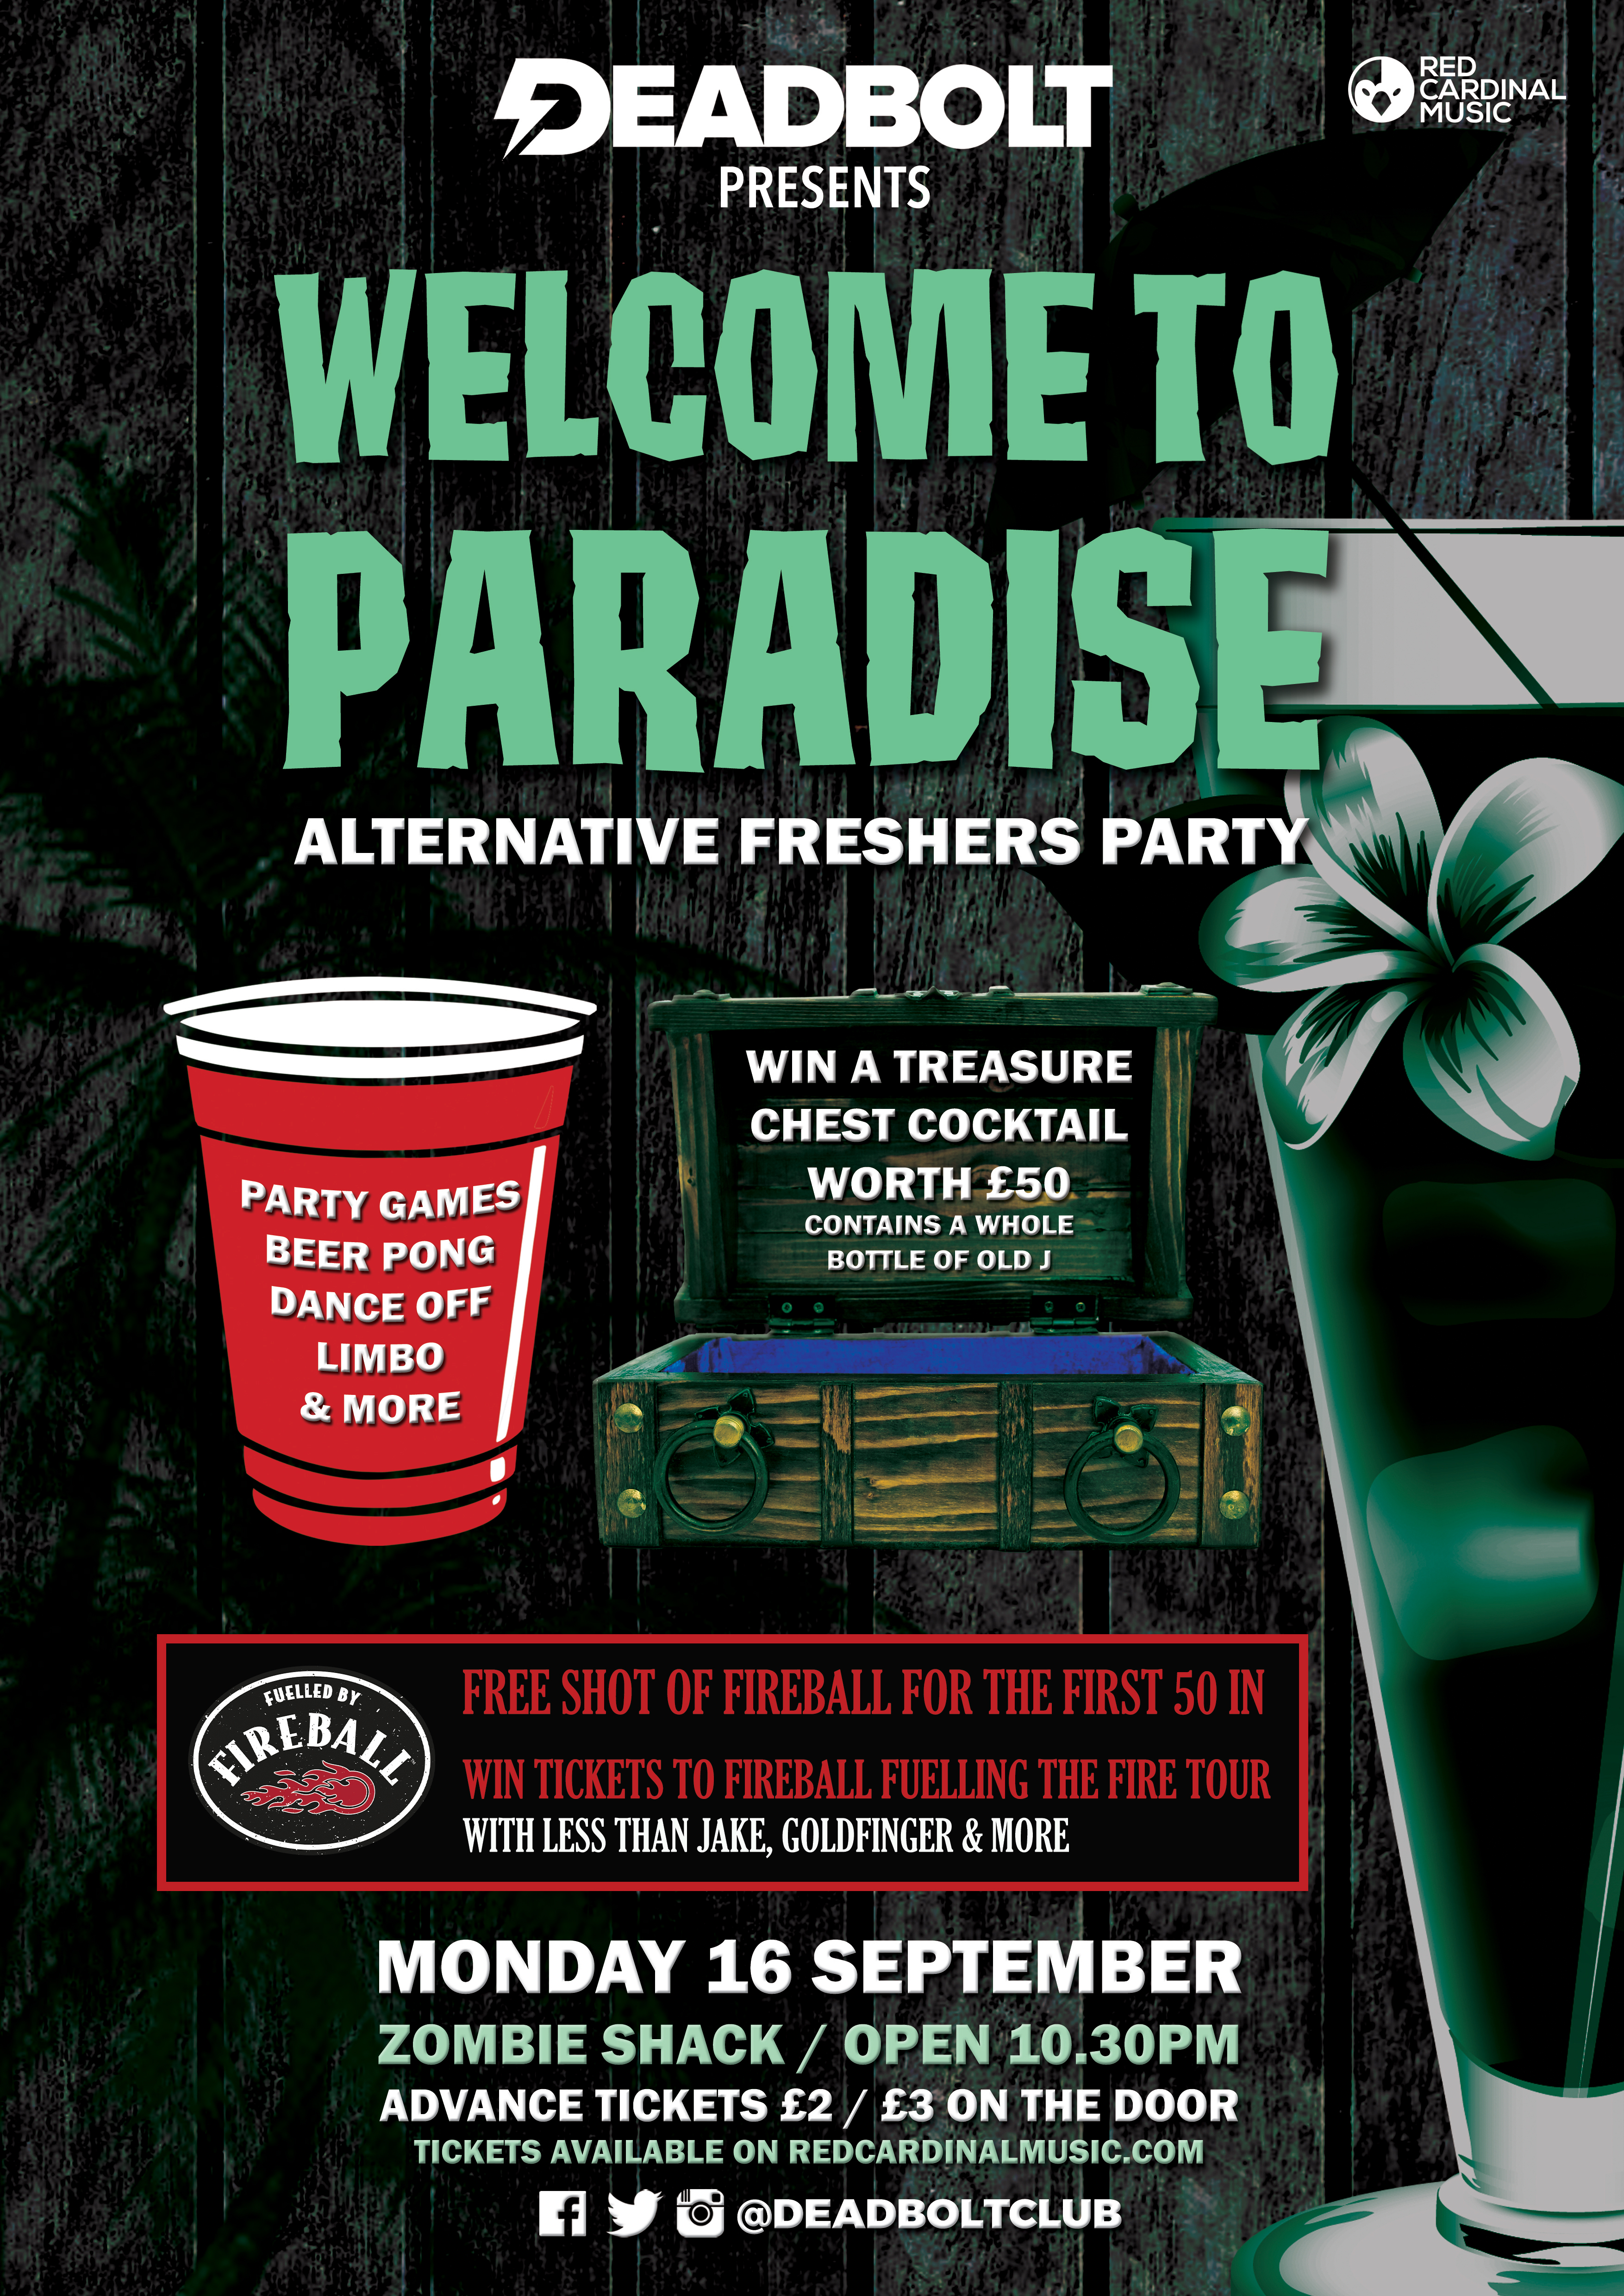 Deadbolt Welcome To Paradise - Freshers 2019 Alternative Freshers Party - Red Cardinal Music